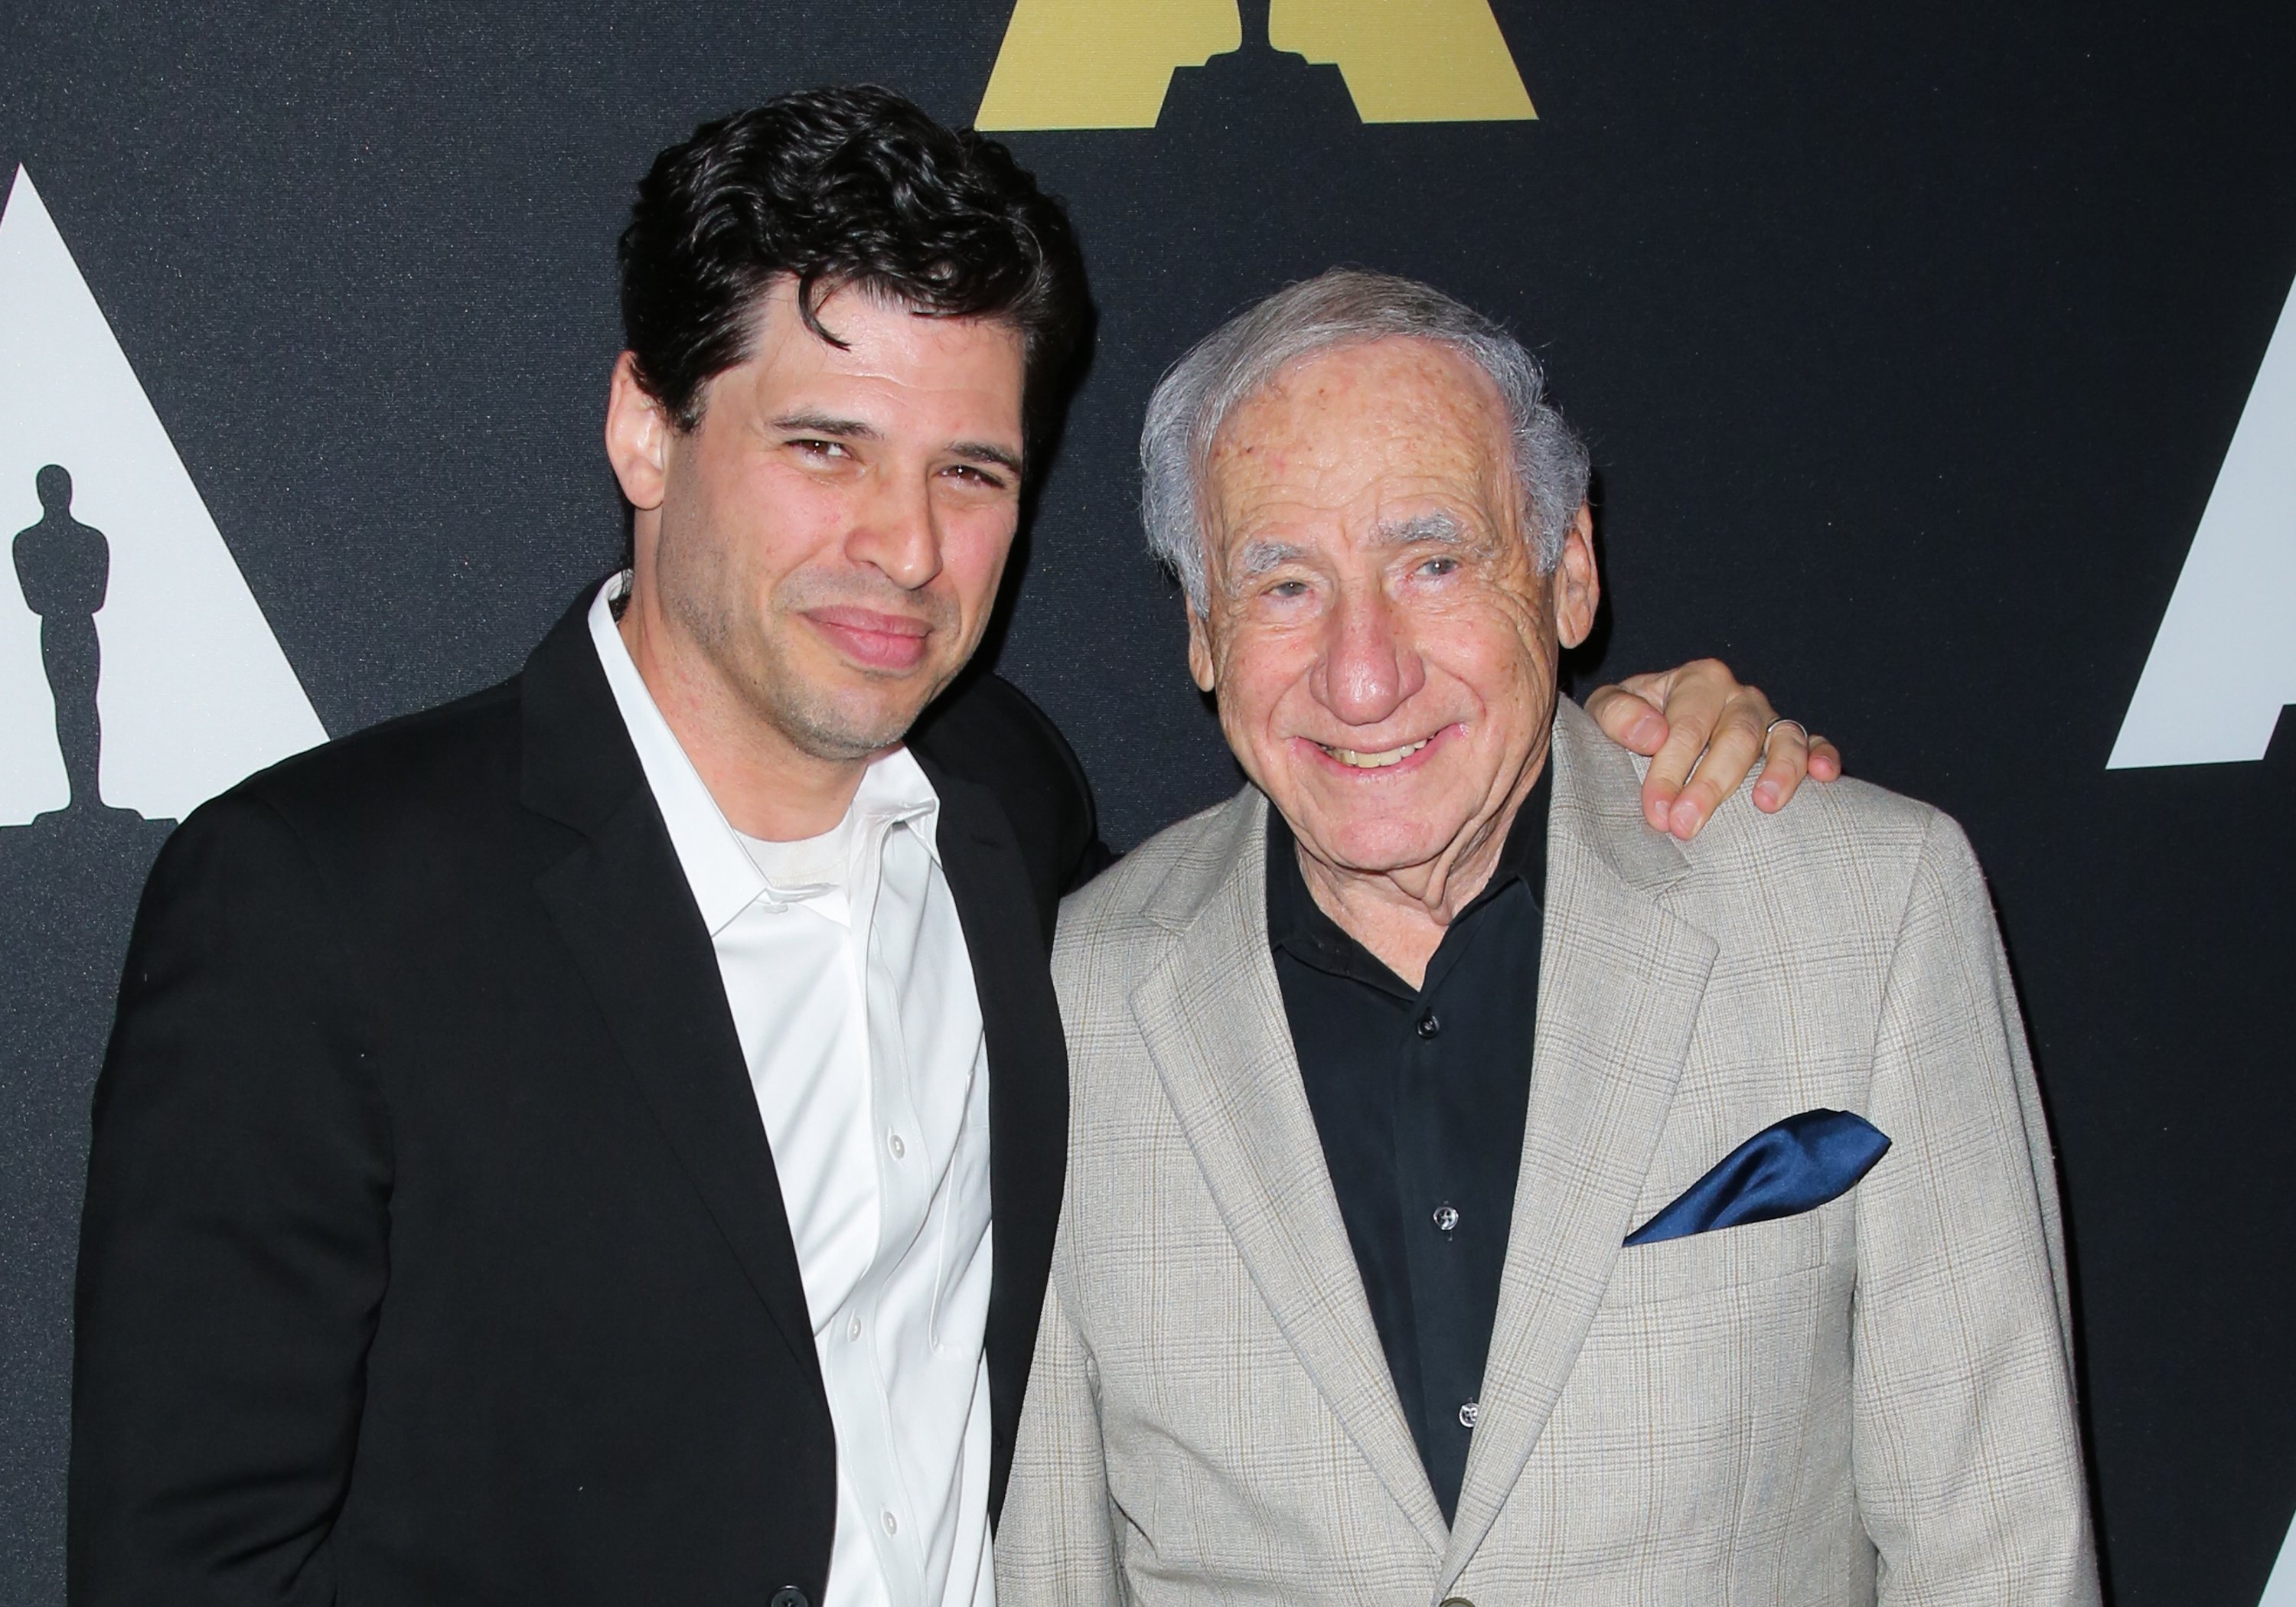 Max and Mel Brooks at the 20th anniversary screening of "The Shawshank Redemption" at the AMPAS Samuel Goldwyn Theater on November 18, 2014 in Beverly Hills, California. | Source: Getty Images